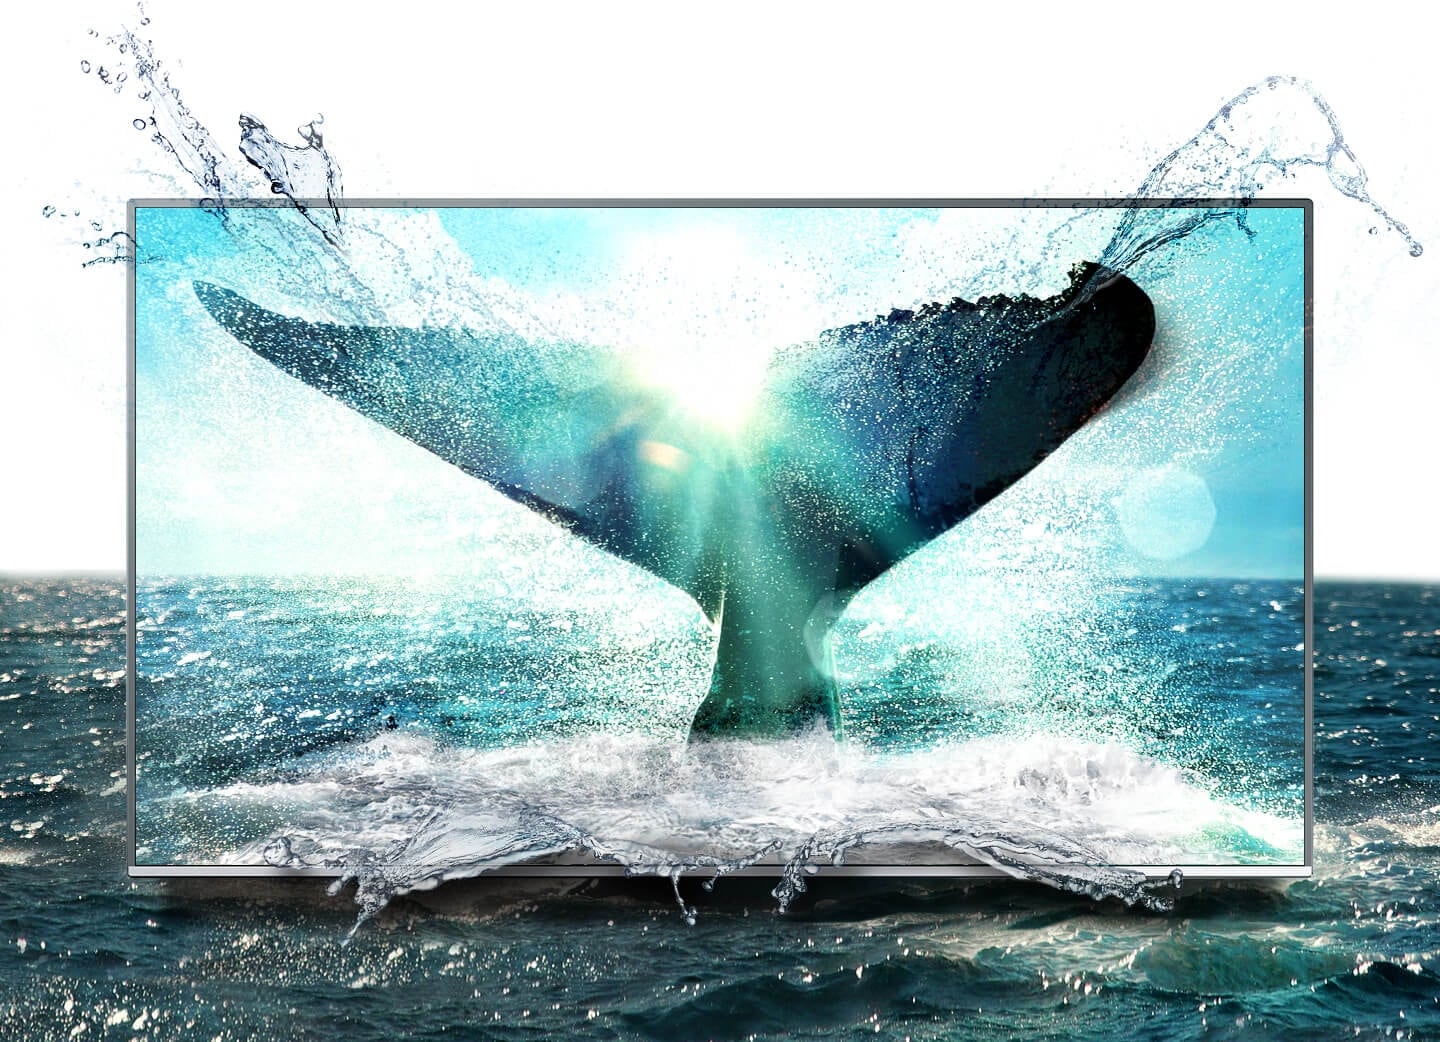 Bright and lively whales tale image is on Samsung SUHD TV screen.